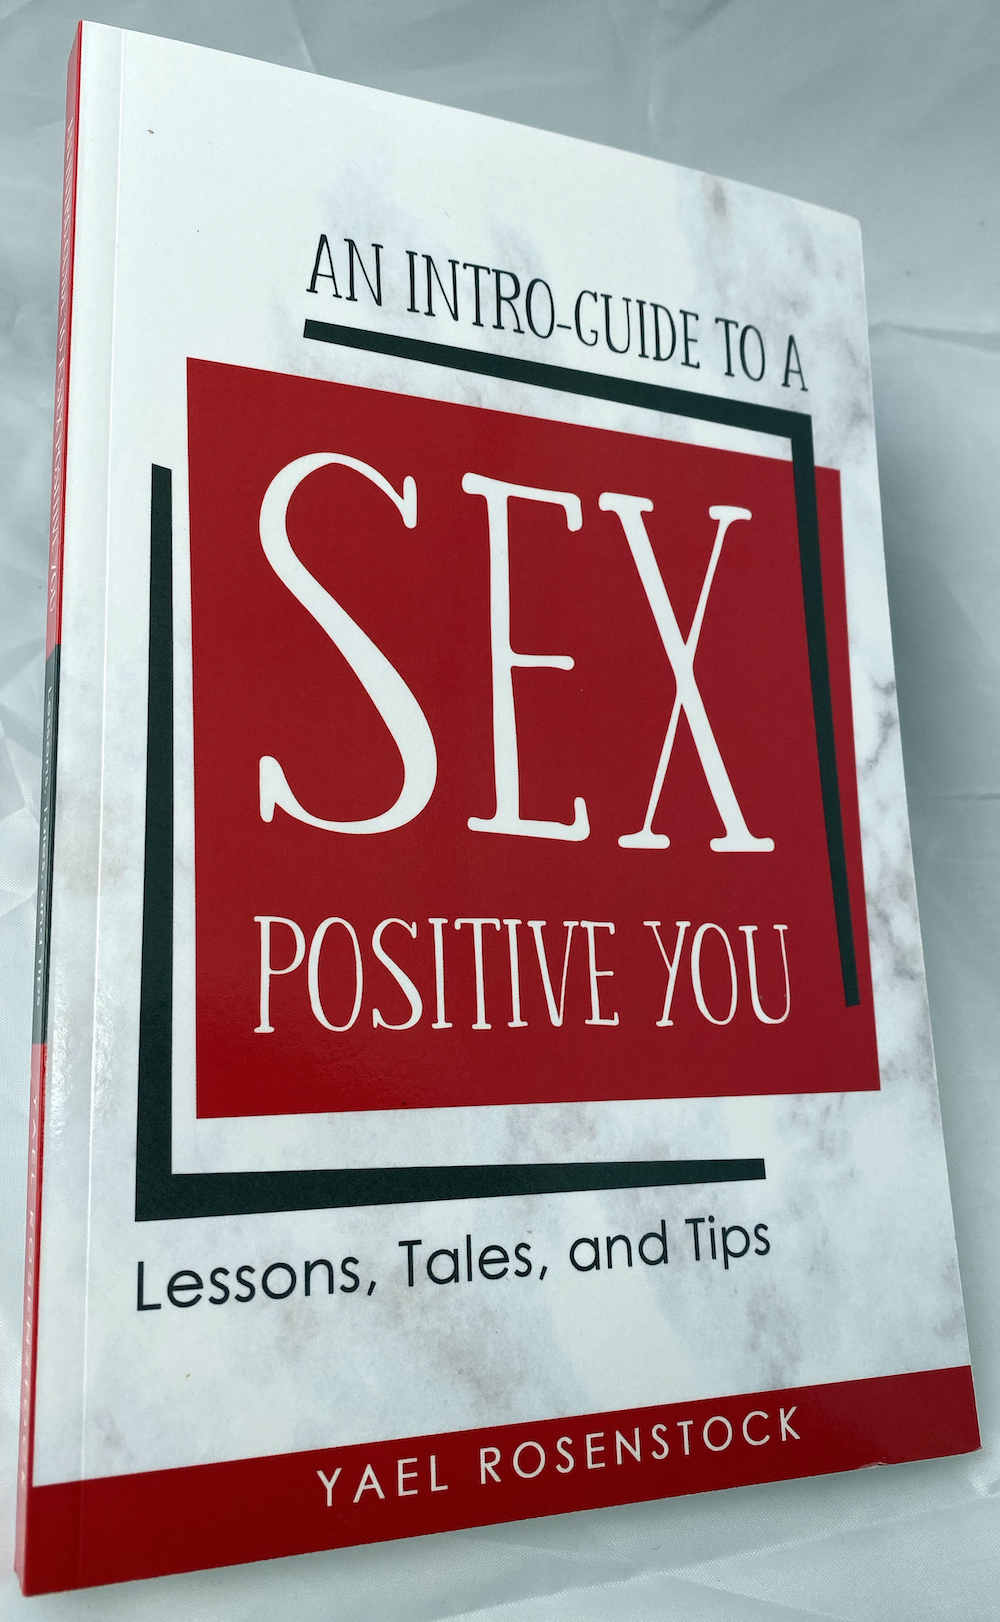 An Introguide to a Sex Positive You - Lessons, Tales, and Tips